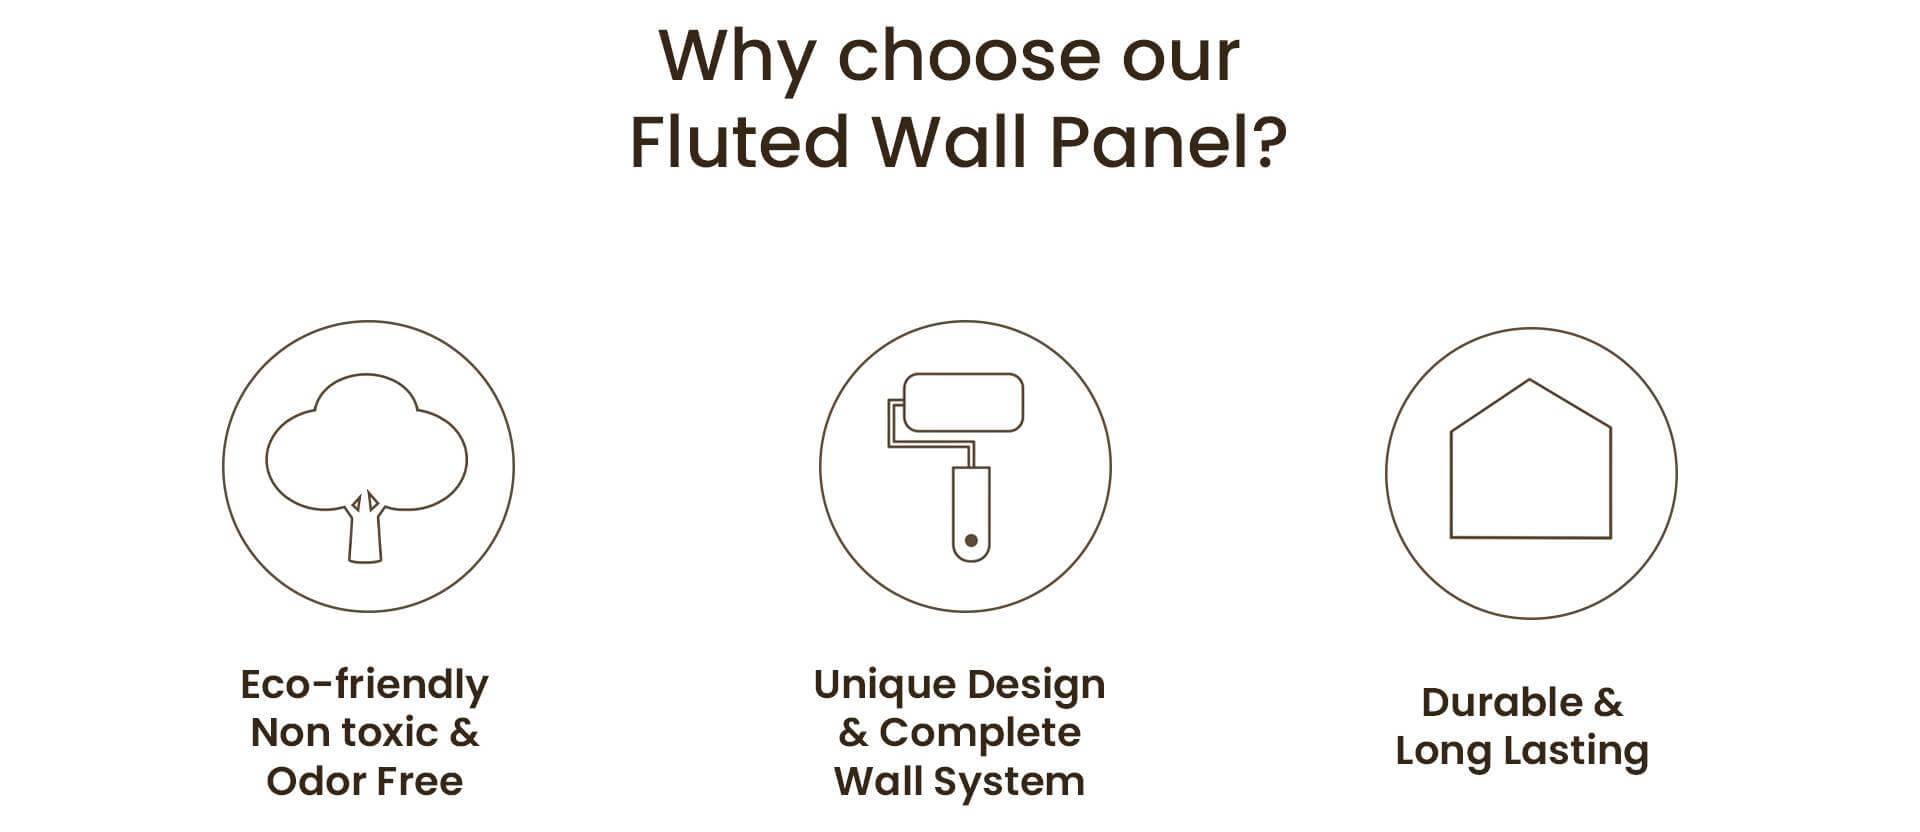 Fluted Wall Panel Singapore, Fluted Wall Panel